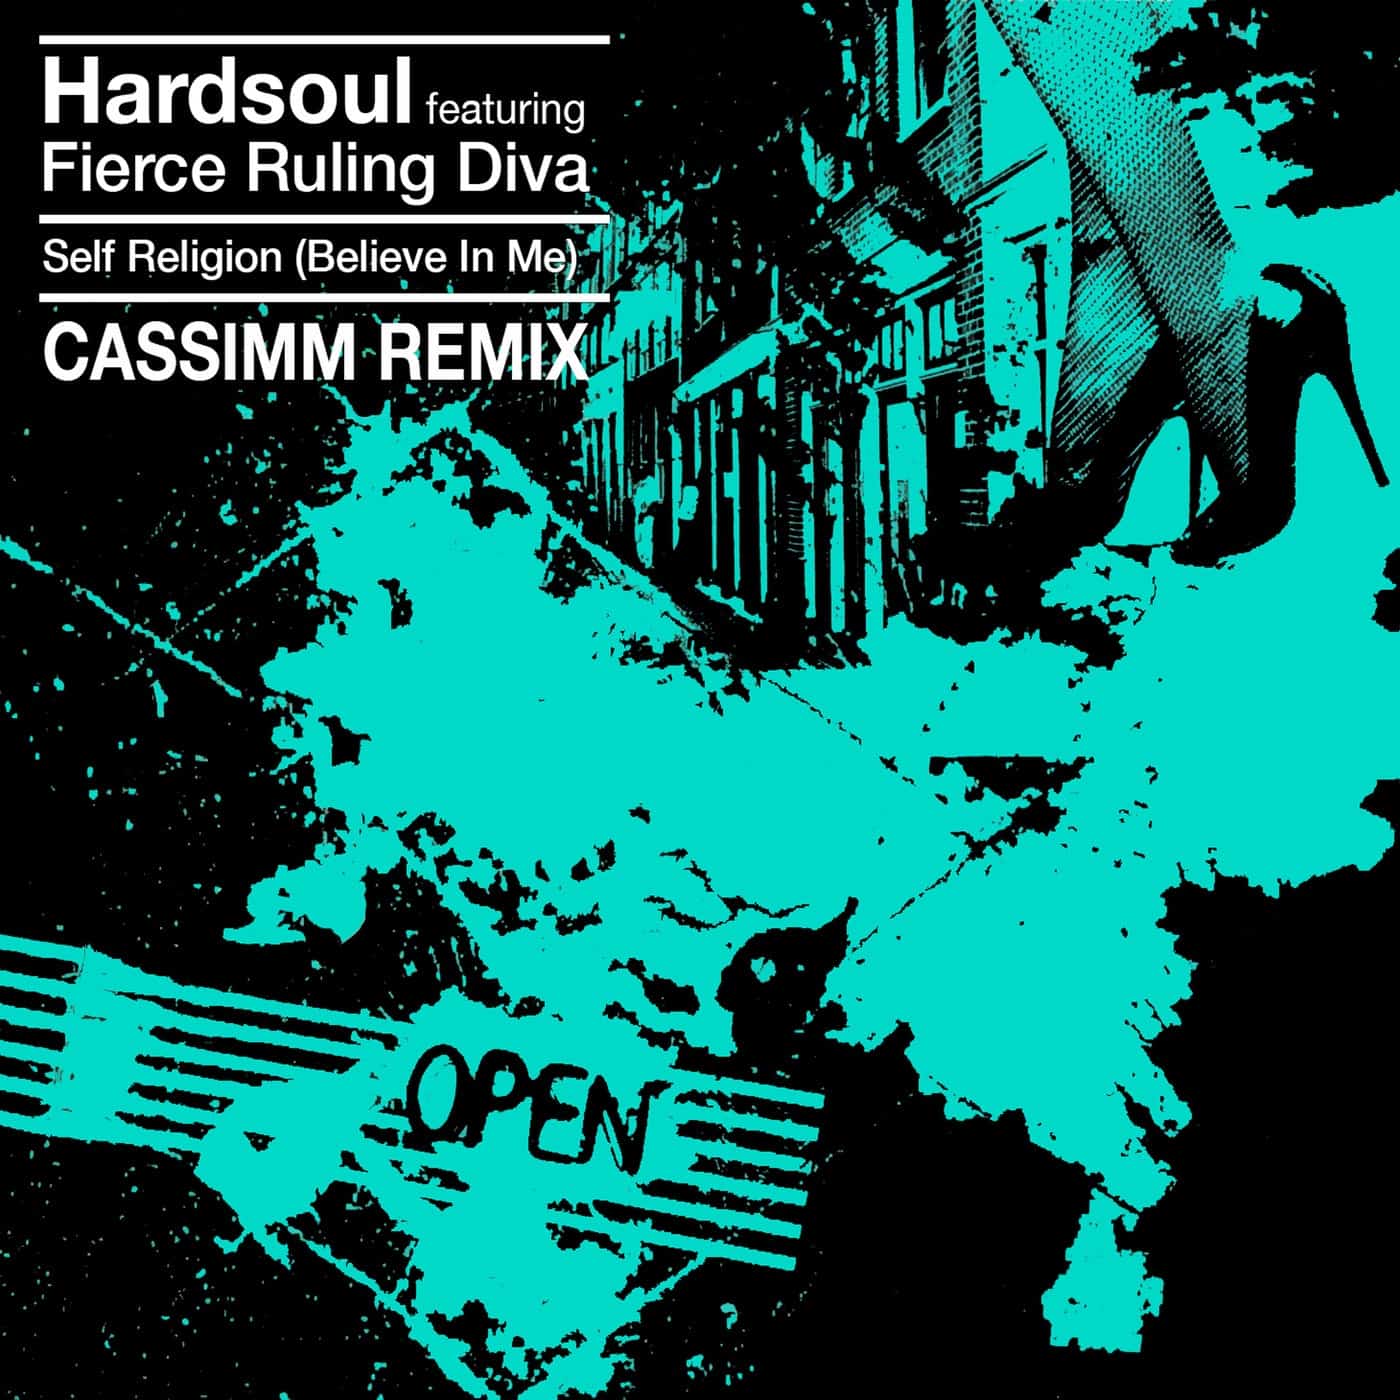 Download Hardsoul, Fierce Ruling Diva, CASSIMM - Self Religion (Believe In Me) - CASSIMM Extended Remix on Electrobuzz